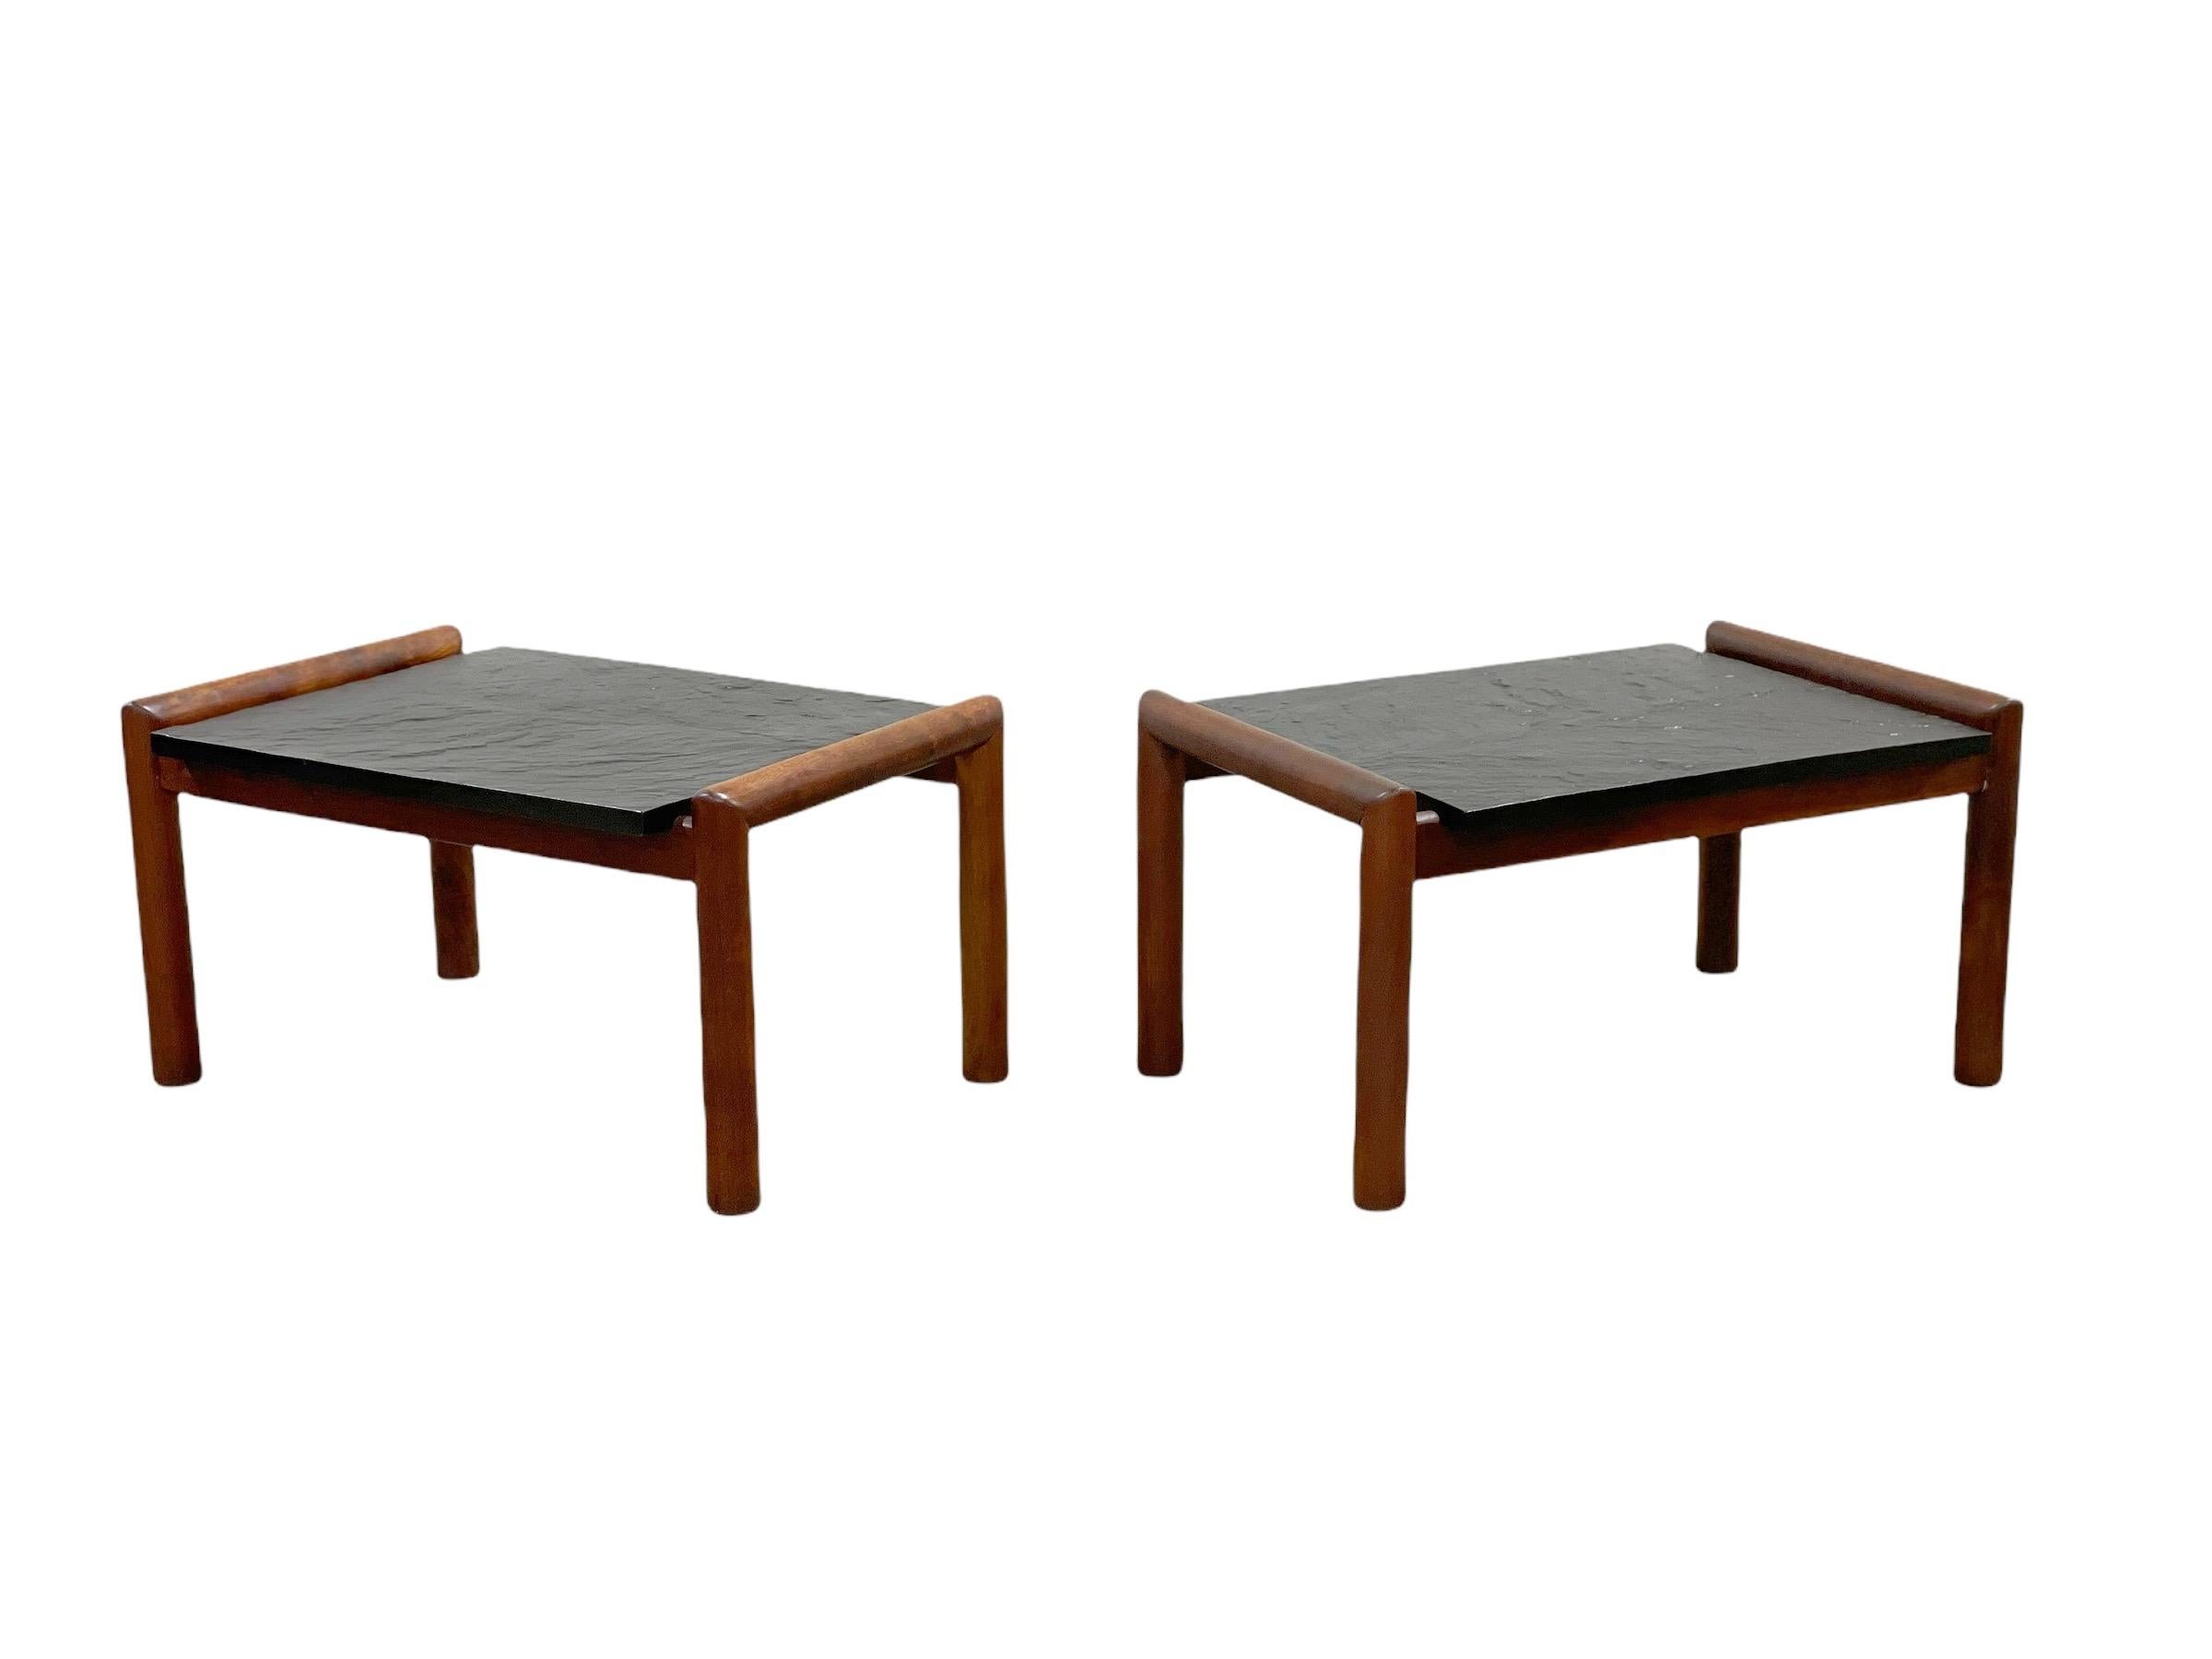 Pair of mid century organic modern end tables by Adrian Pearsall for Craft Associates circa 1965. Featuring solid American black walnut frames with slate tops. Clean refined simple lines and a perfect juxtaposition of materials - these tables lend